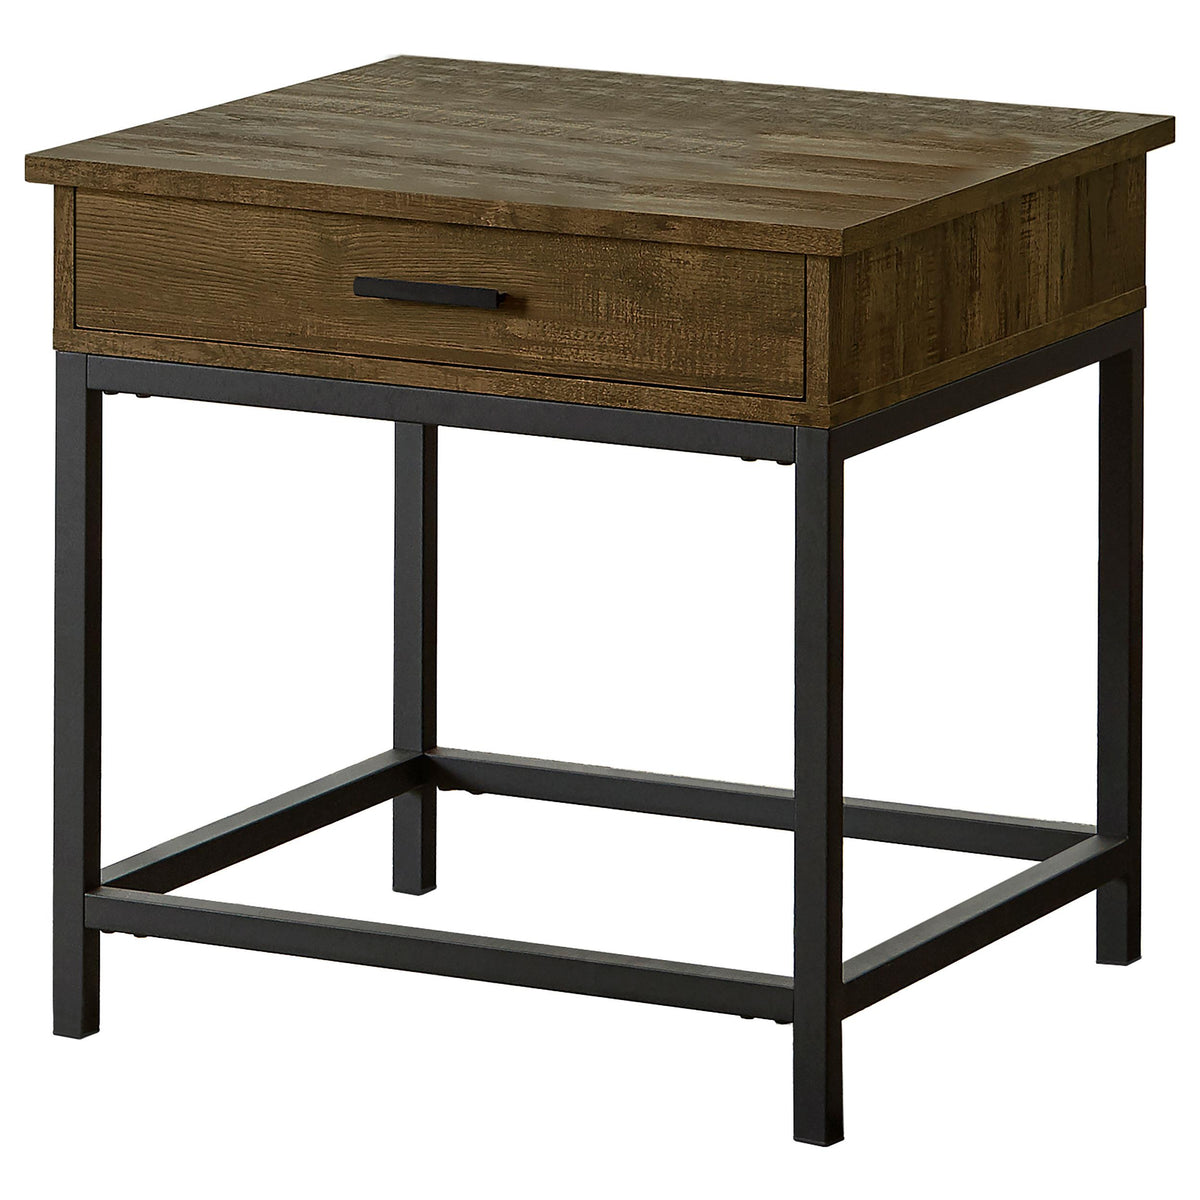 Byers Square 1-drawer End Table Brown Oak and Sandy Black  Half Price Furniture